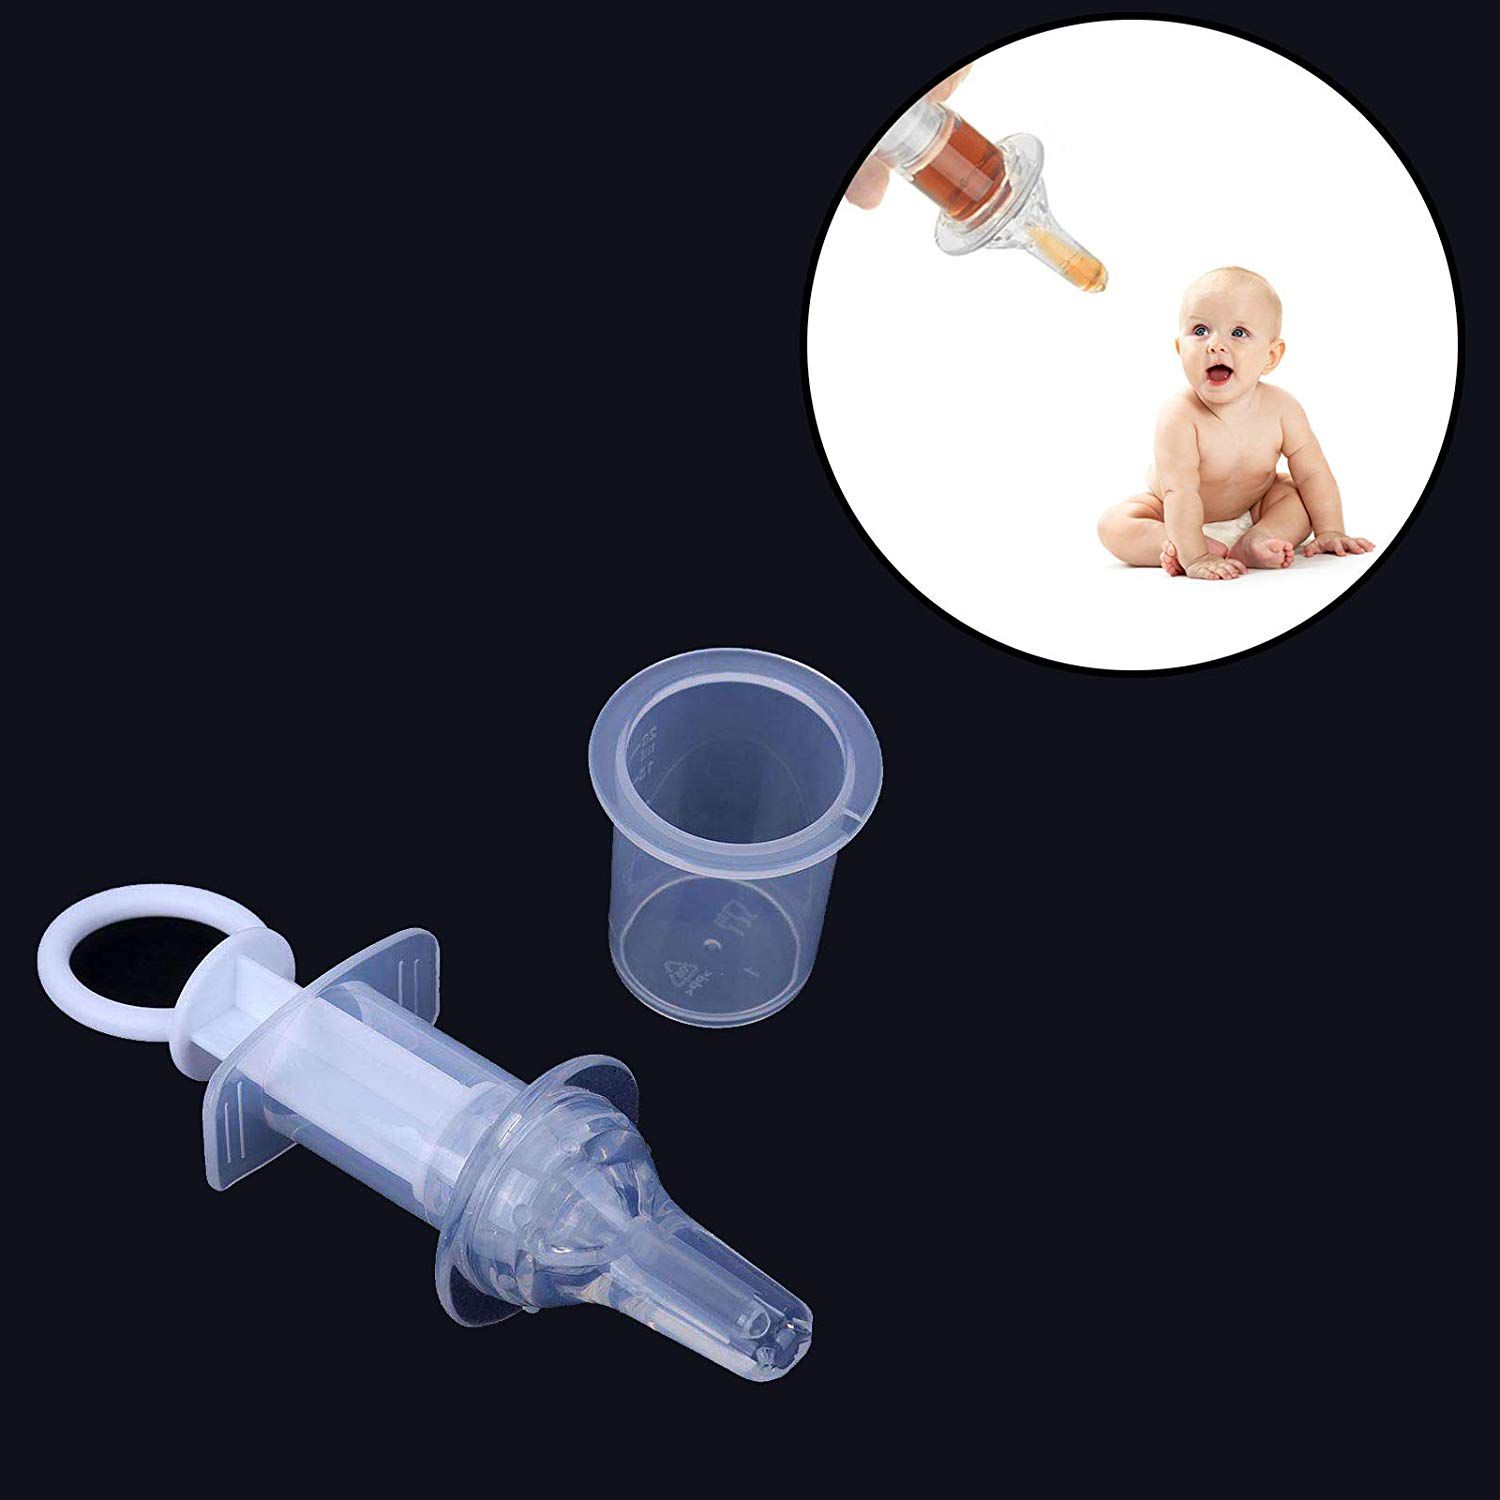     			Safe-O-Kid- Pack of 2-High Quality, BPA Free Silicone Liquid Medicine Feeder/ Dropper for Baby